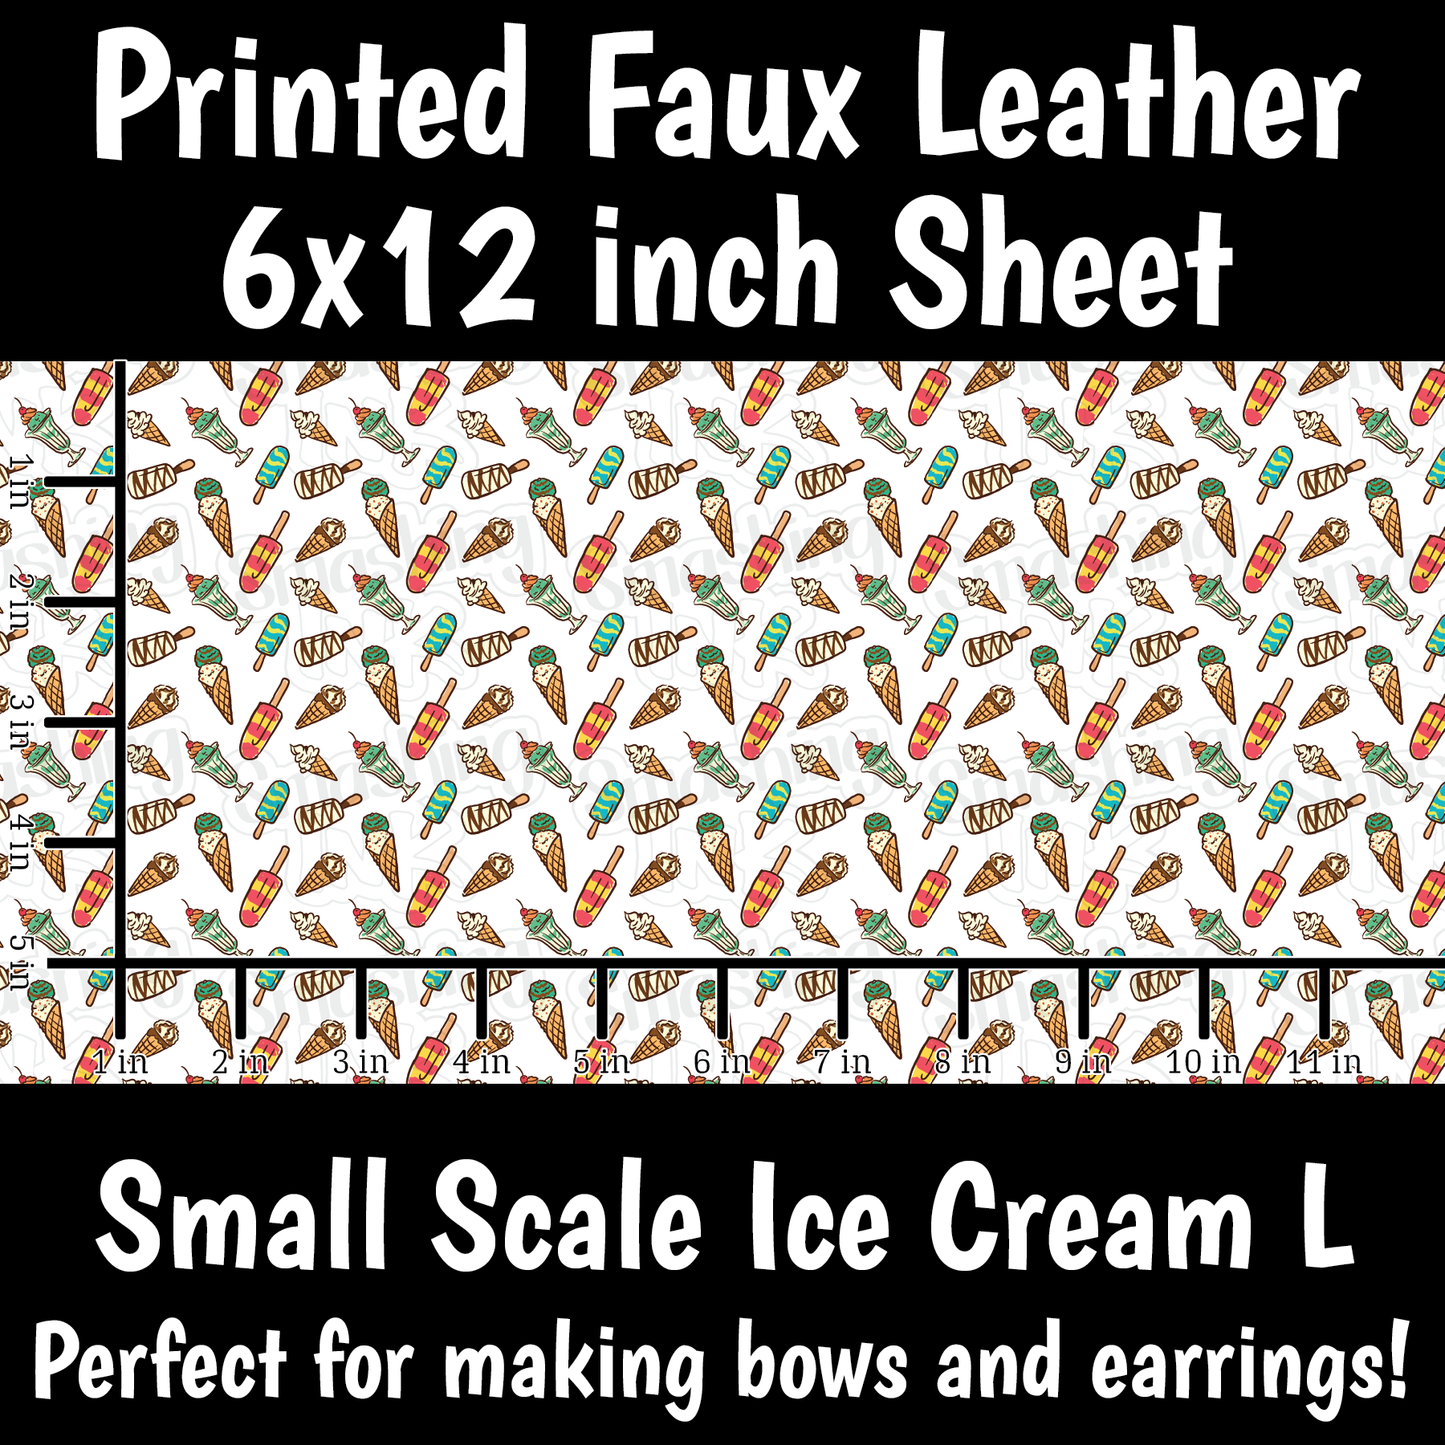 Small Scale Ice Cream L - Faux Leather Sheet (SHIPS IN 3 BUS DAYS)